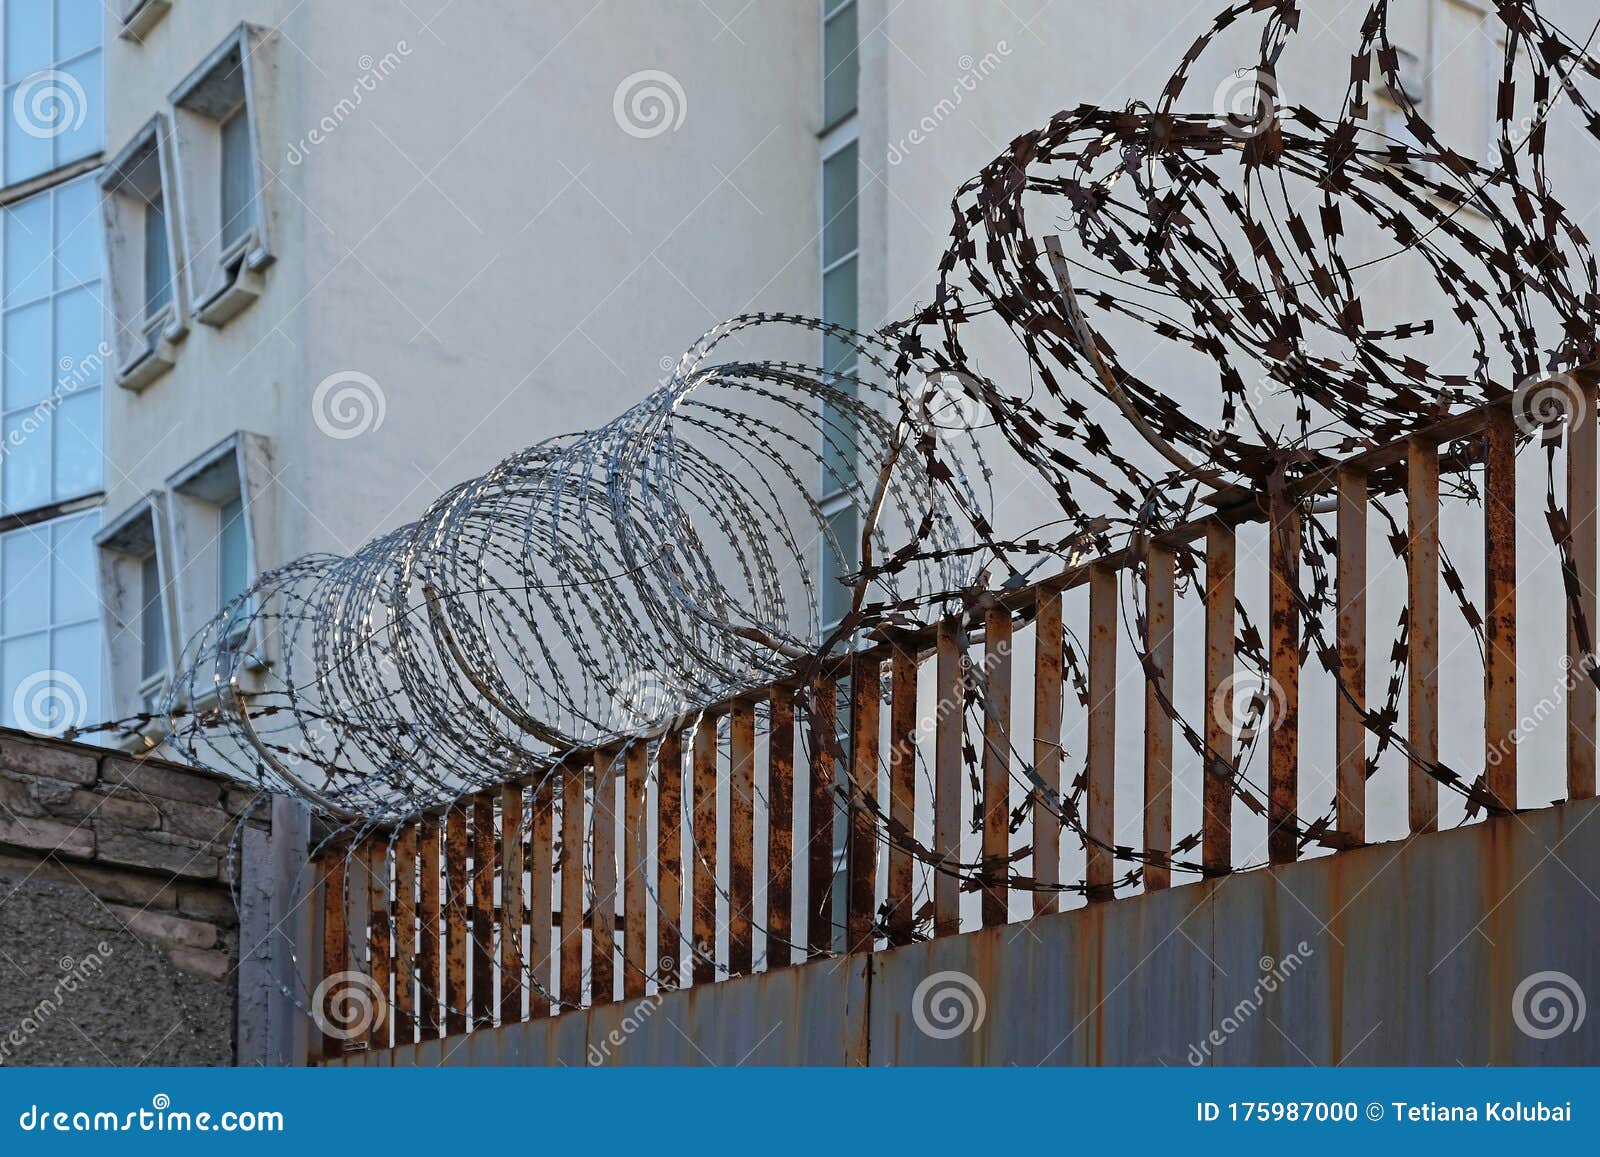 barbed wire egoza spiral on the fence.